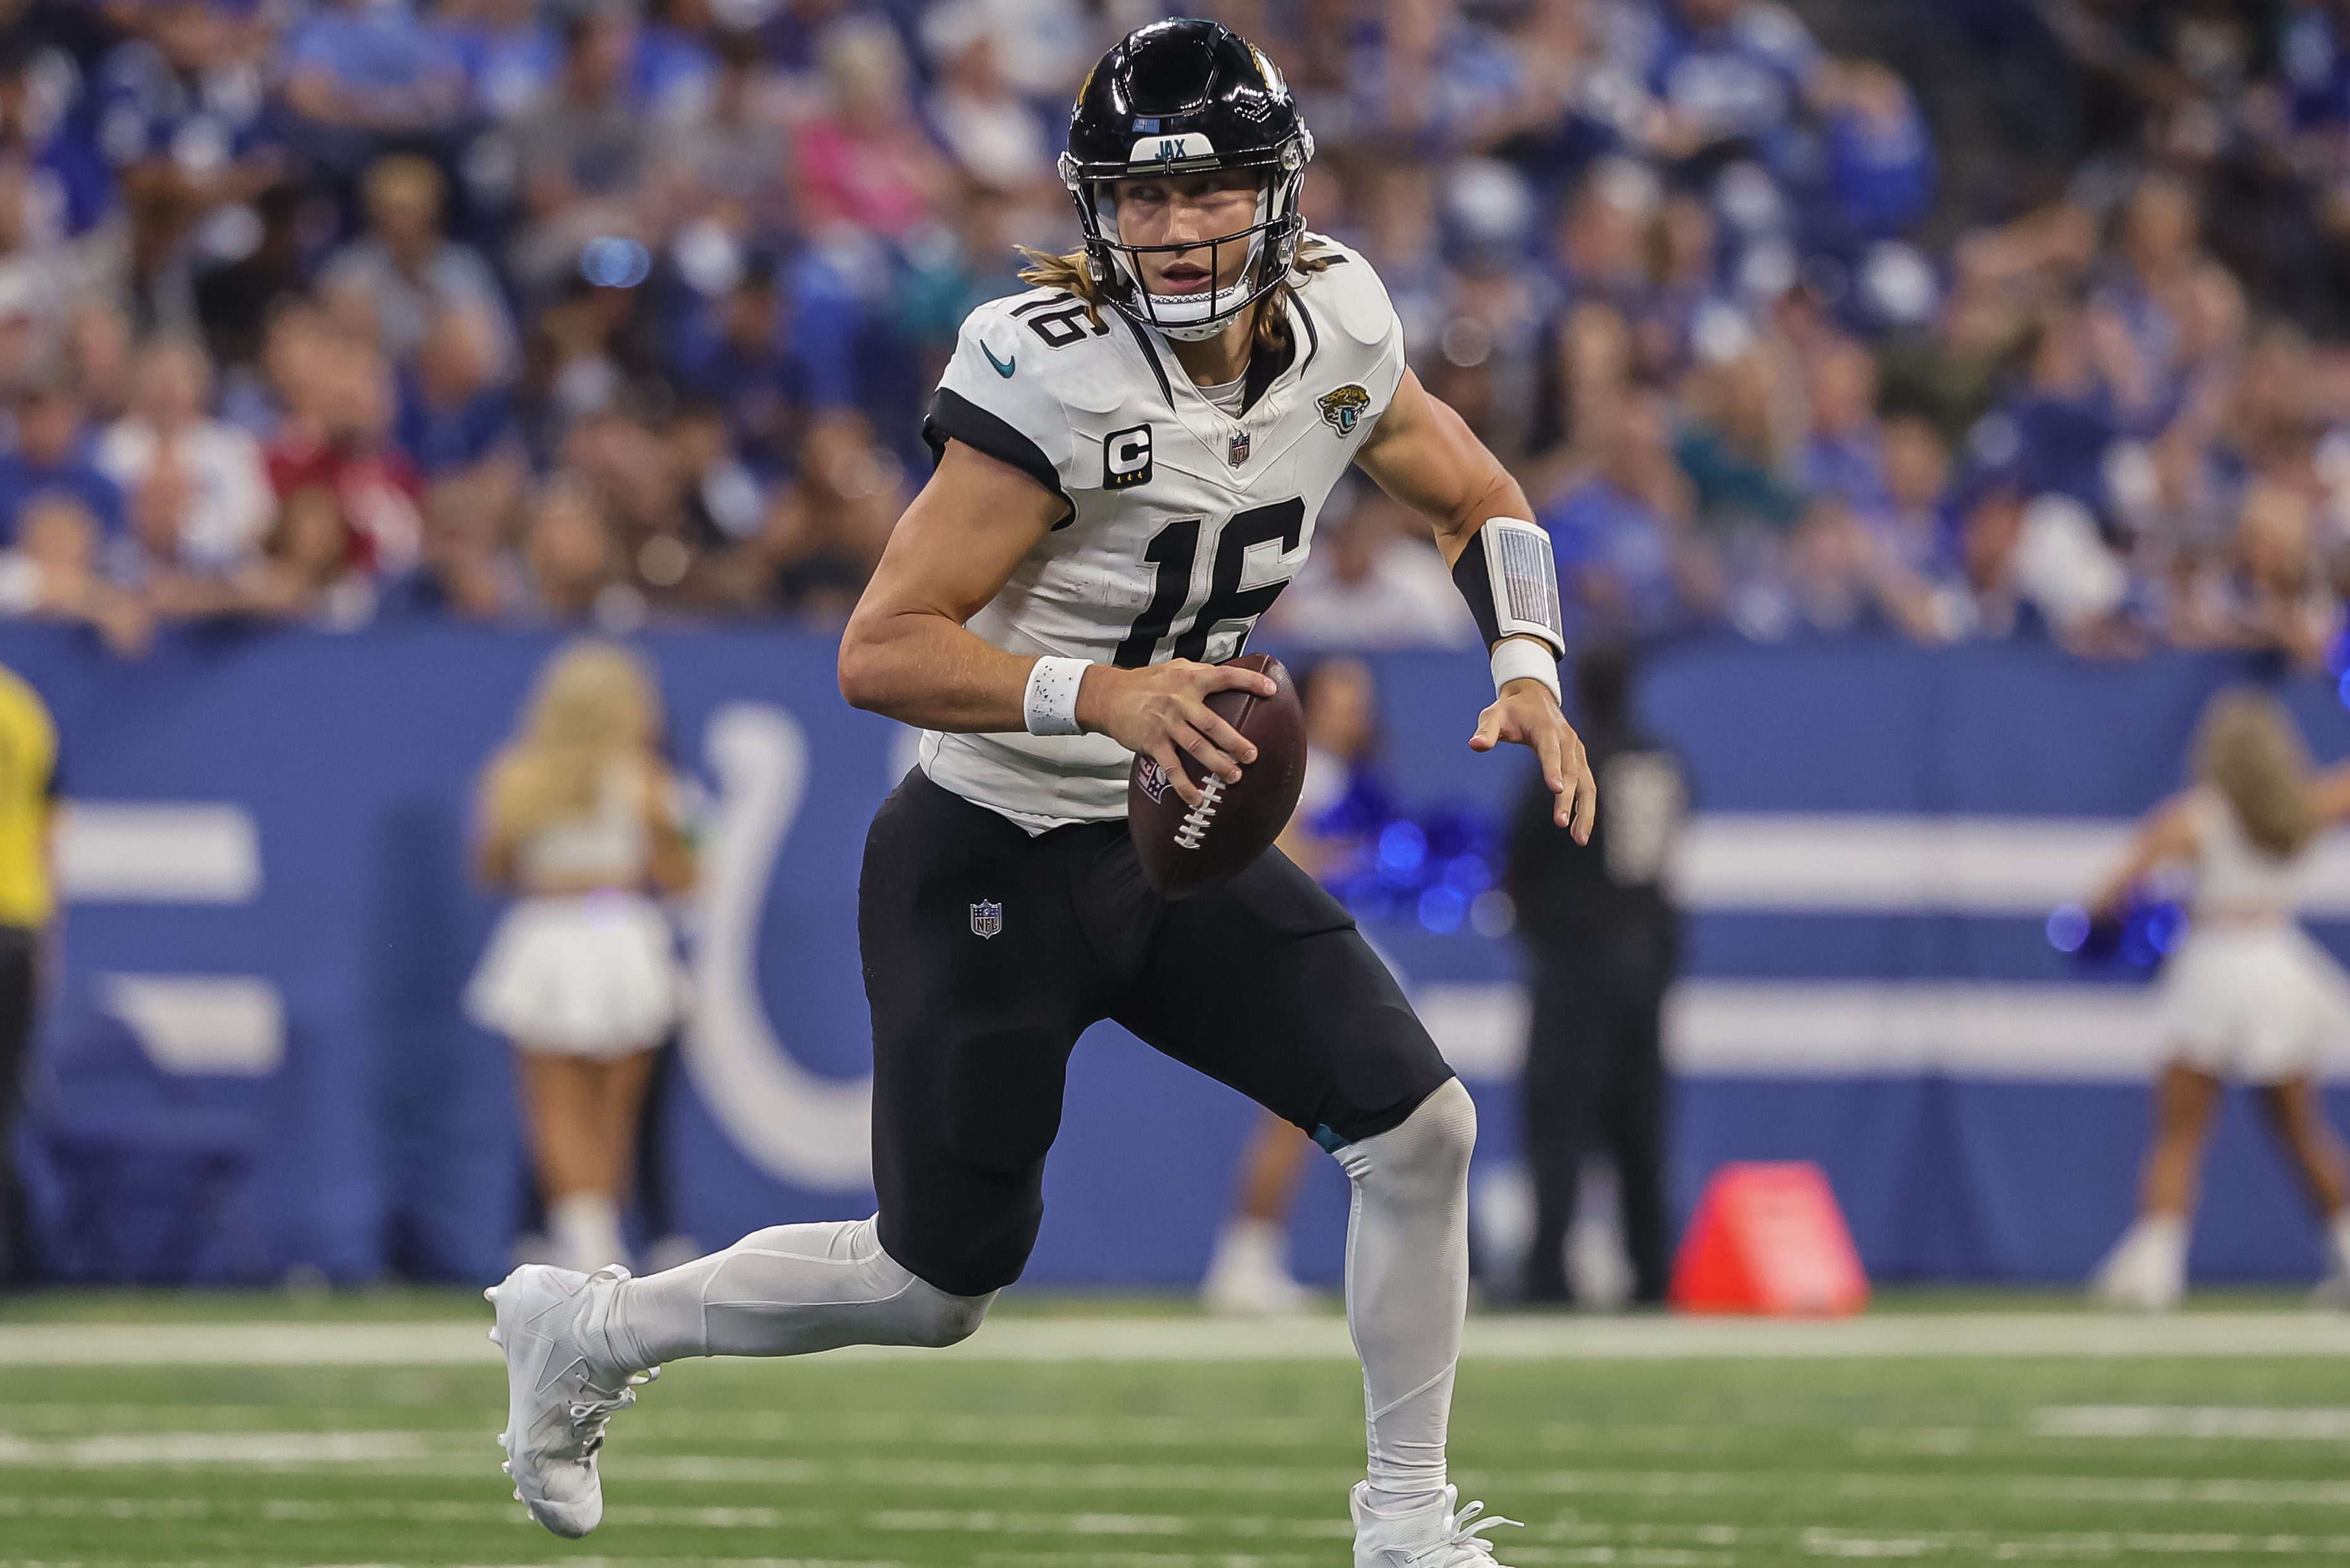 Top five storylines from Week 1 of the 2023 NFL season